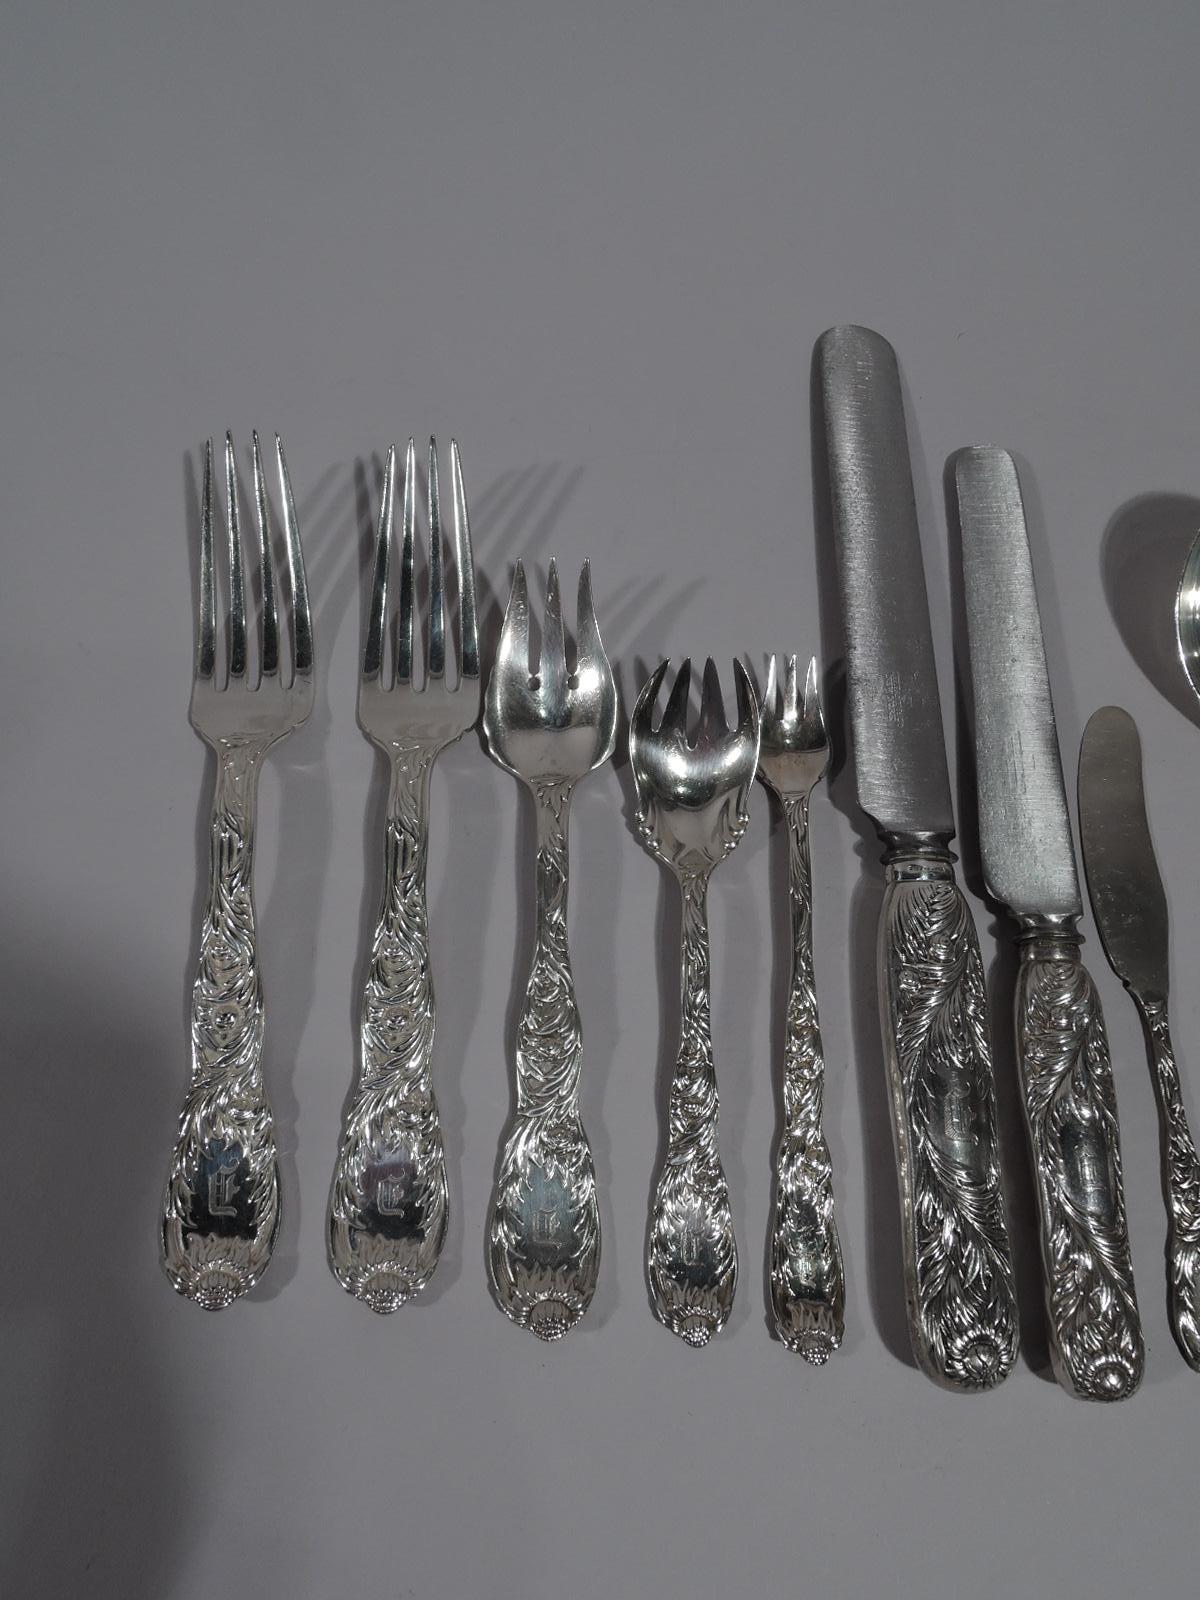 Chrysanthemum sterling silver dinner set. Made by Tiffany & Co. in New York, circa 1890.

This set comprises 145 pieces (dimensions in inches): Forks: 24 dinner forks (7 1/2), 12 salad/terrapin forks (6 3/8), 12 seafood forks (6), and 12 ice cream